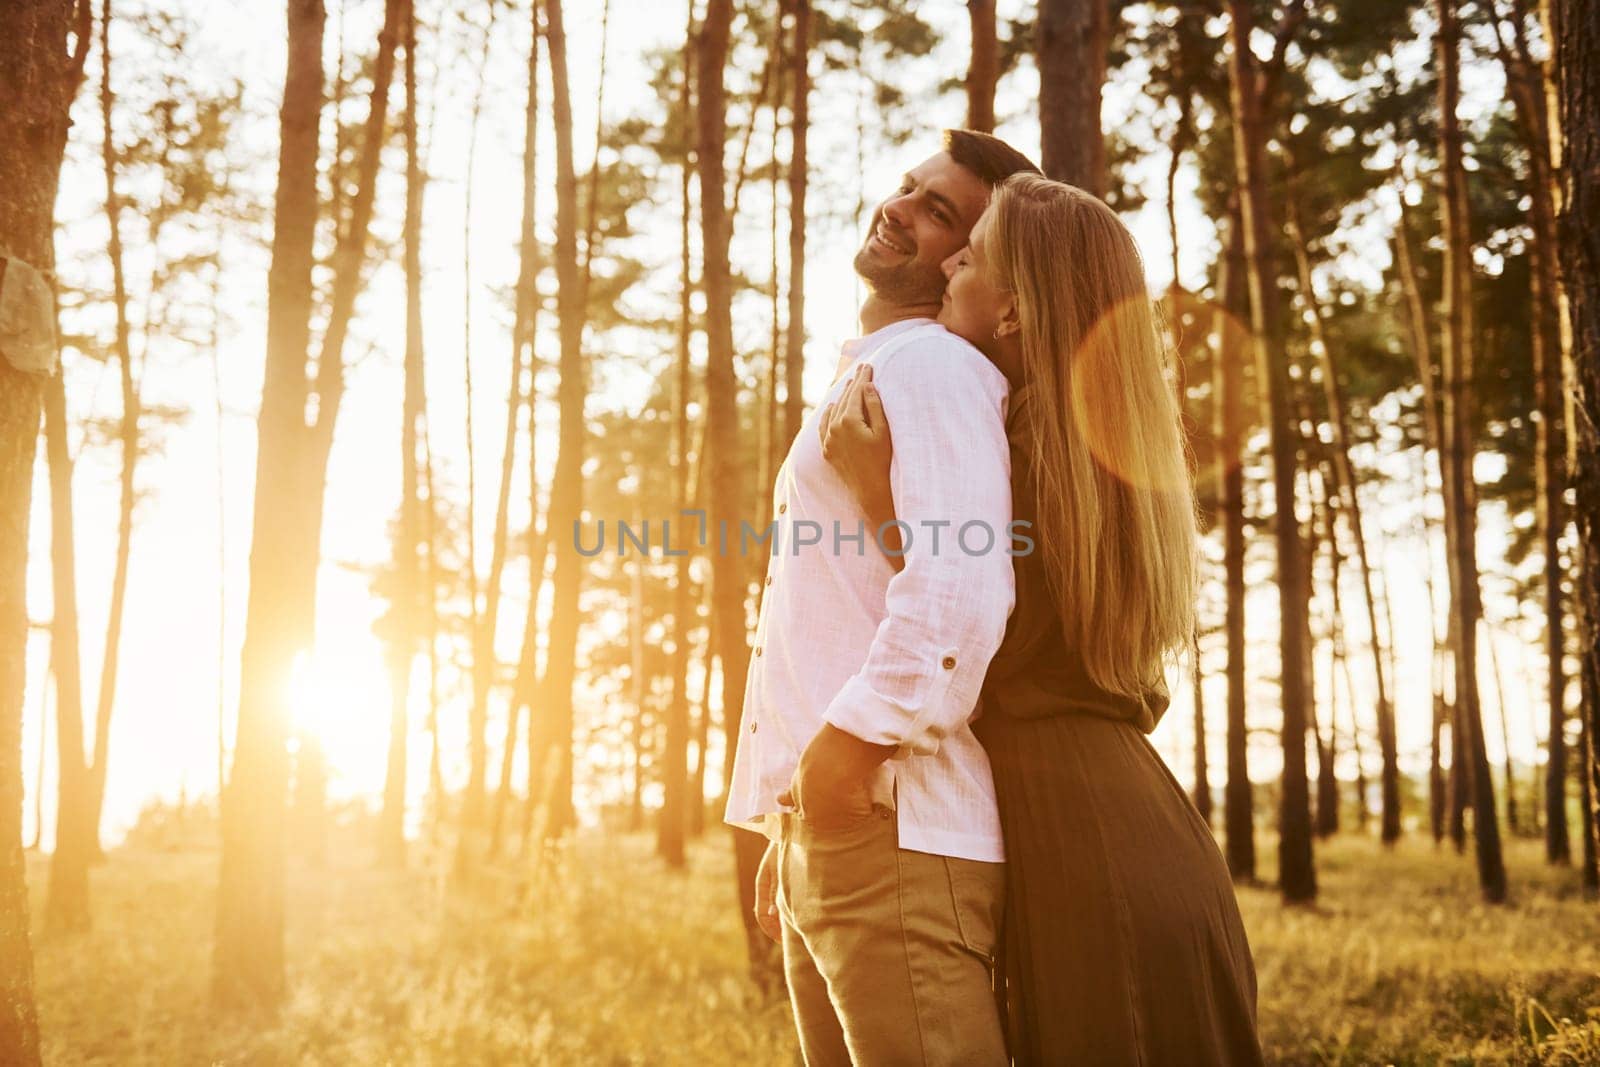 Illuminated by sunlight. Happy couple is outdoors in the forest at daytime.